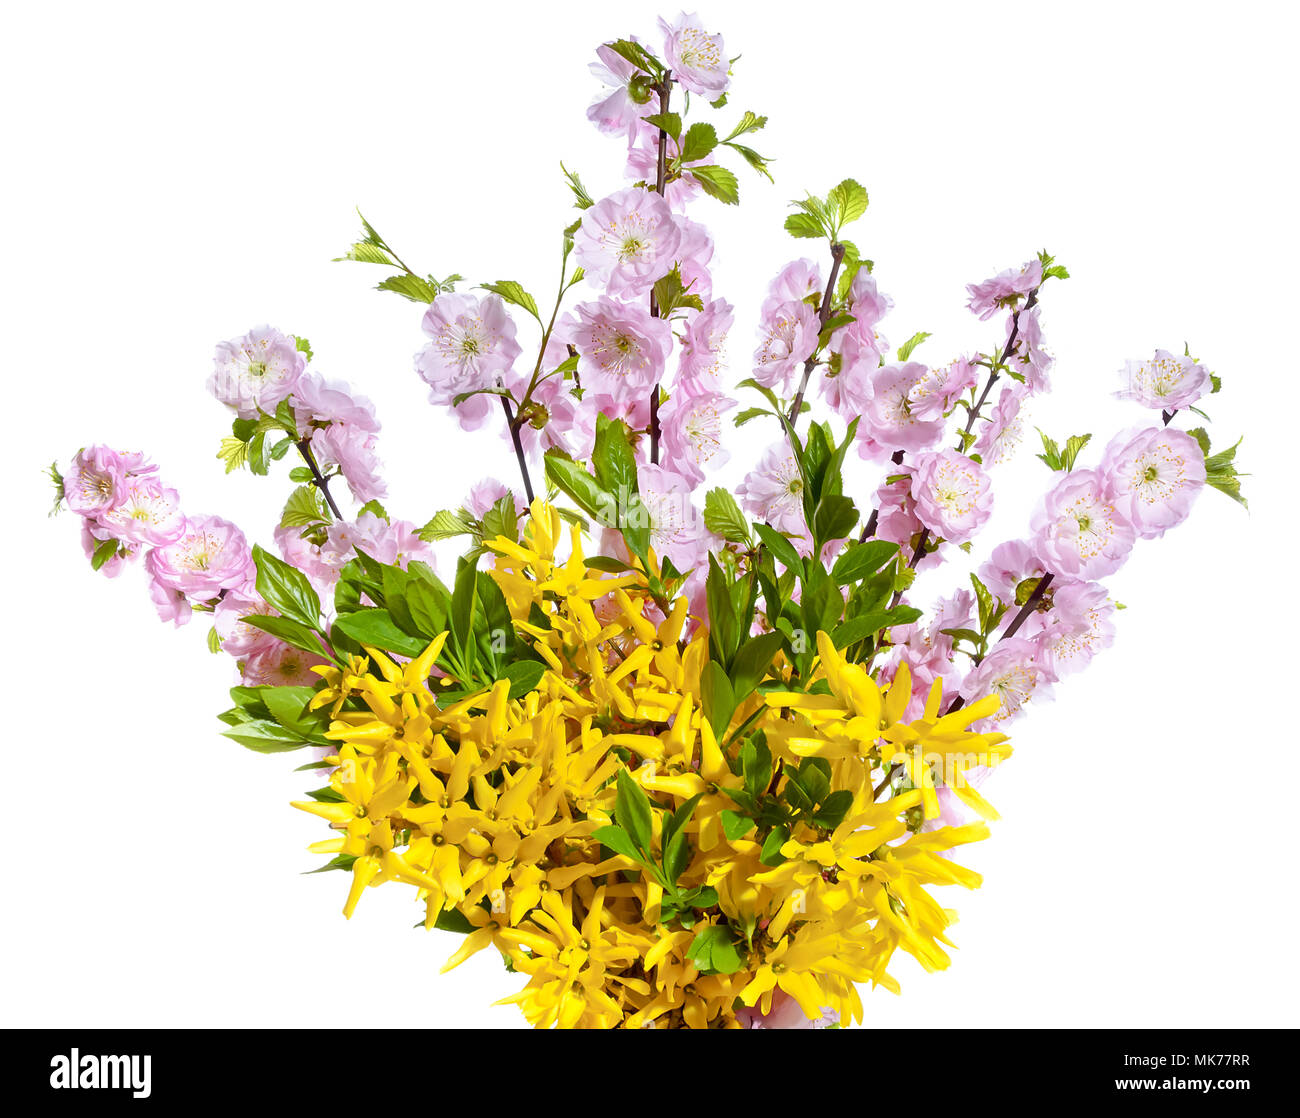 Bouquet of blooming branches of forsythia and almond on a white background. Stock Photo